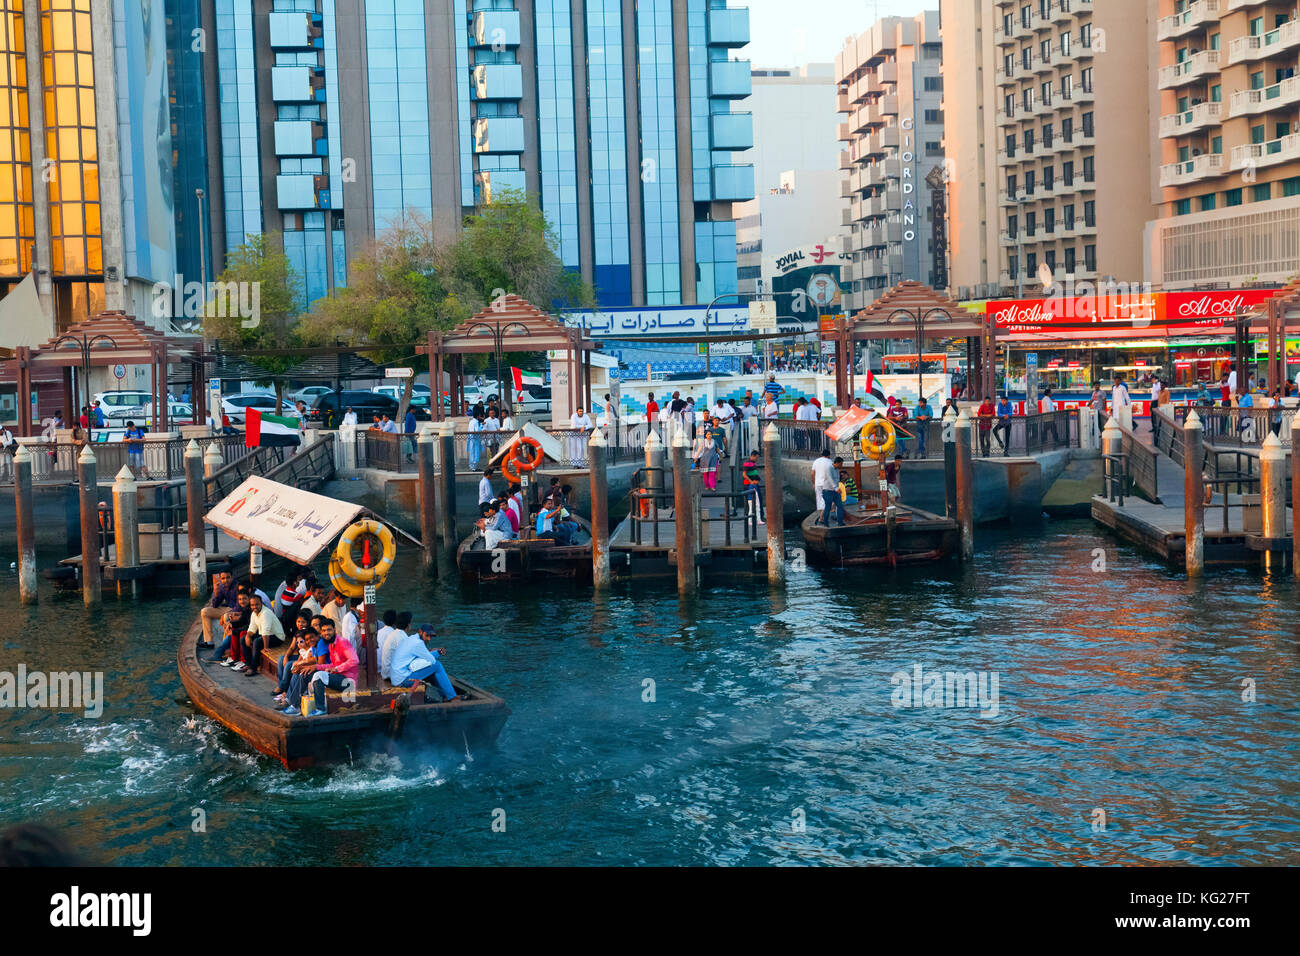 A water taxi carrying passengers arrives at a busy dock, Dubai Creek, Dubai, United Arab Emirates, Middle East Stock Photo